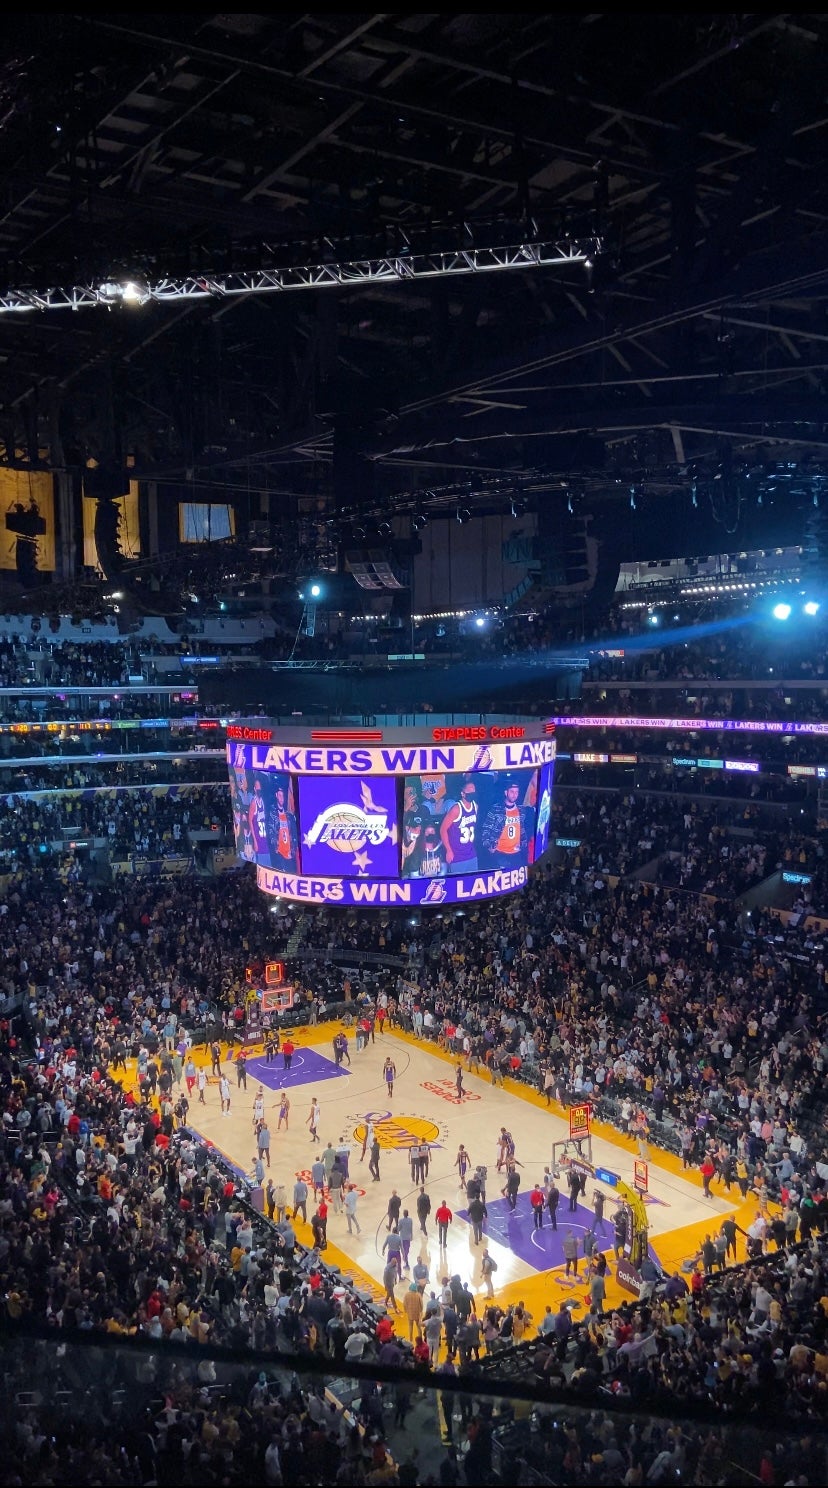 A win for the Lakers